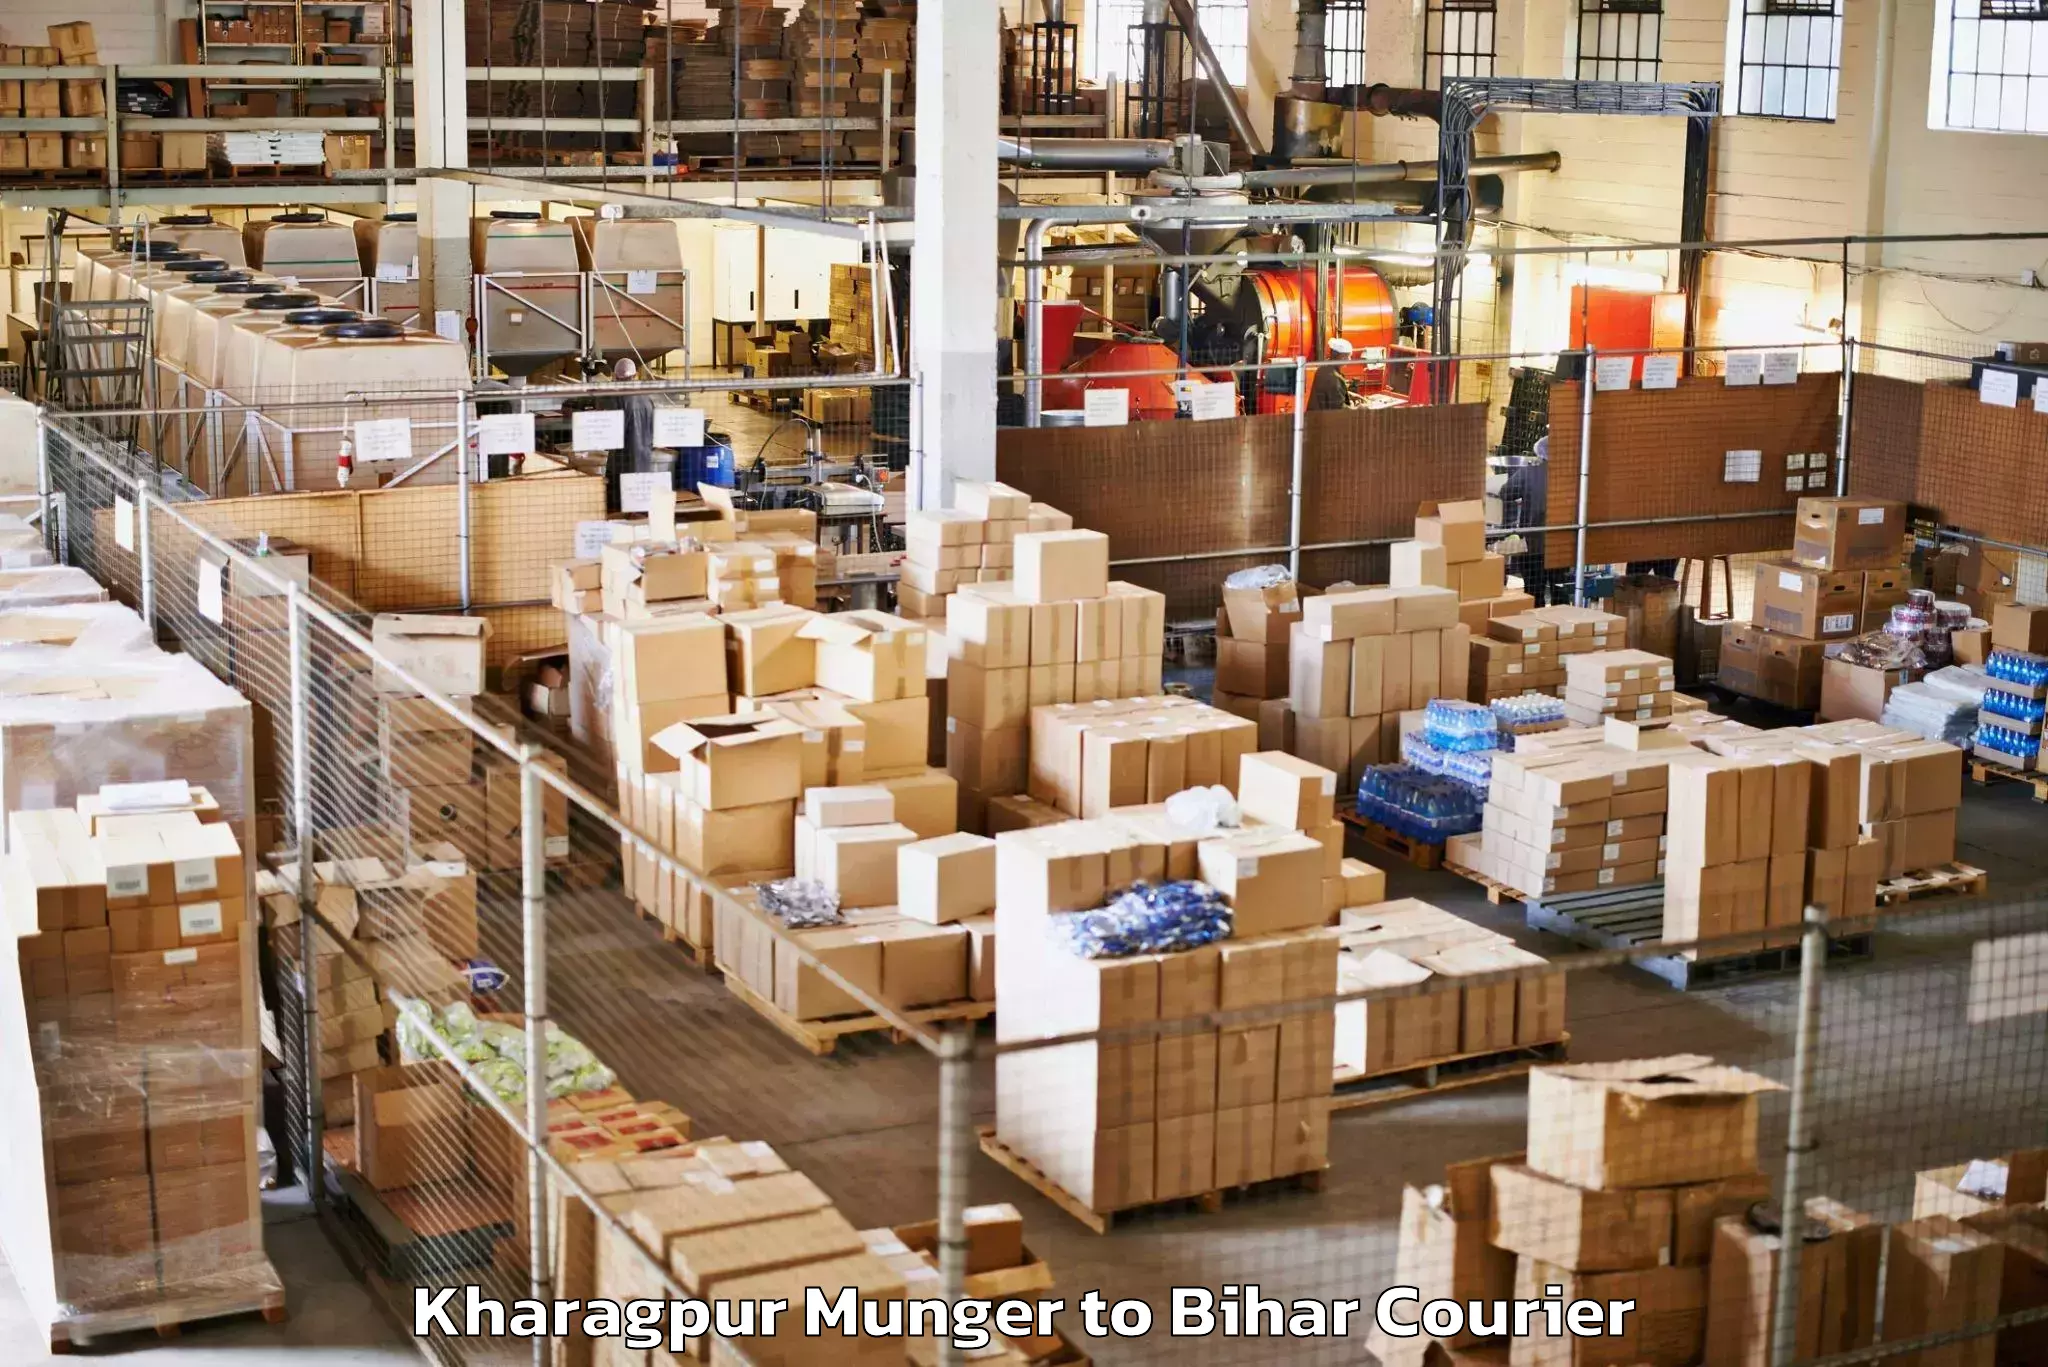 Baggage delivery support Kharagpur Munger to Maheshkhunt